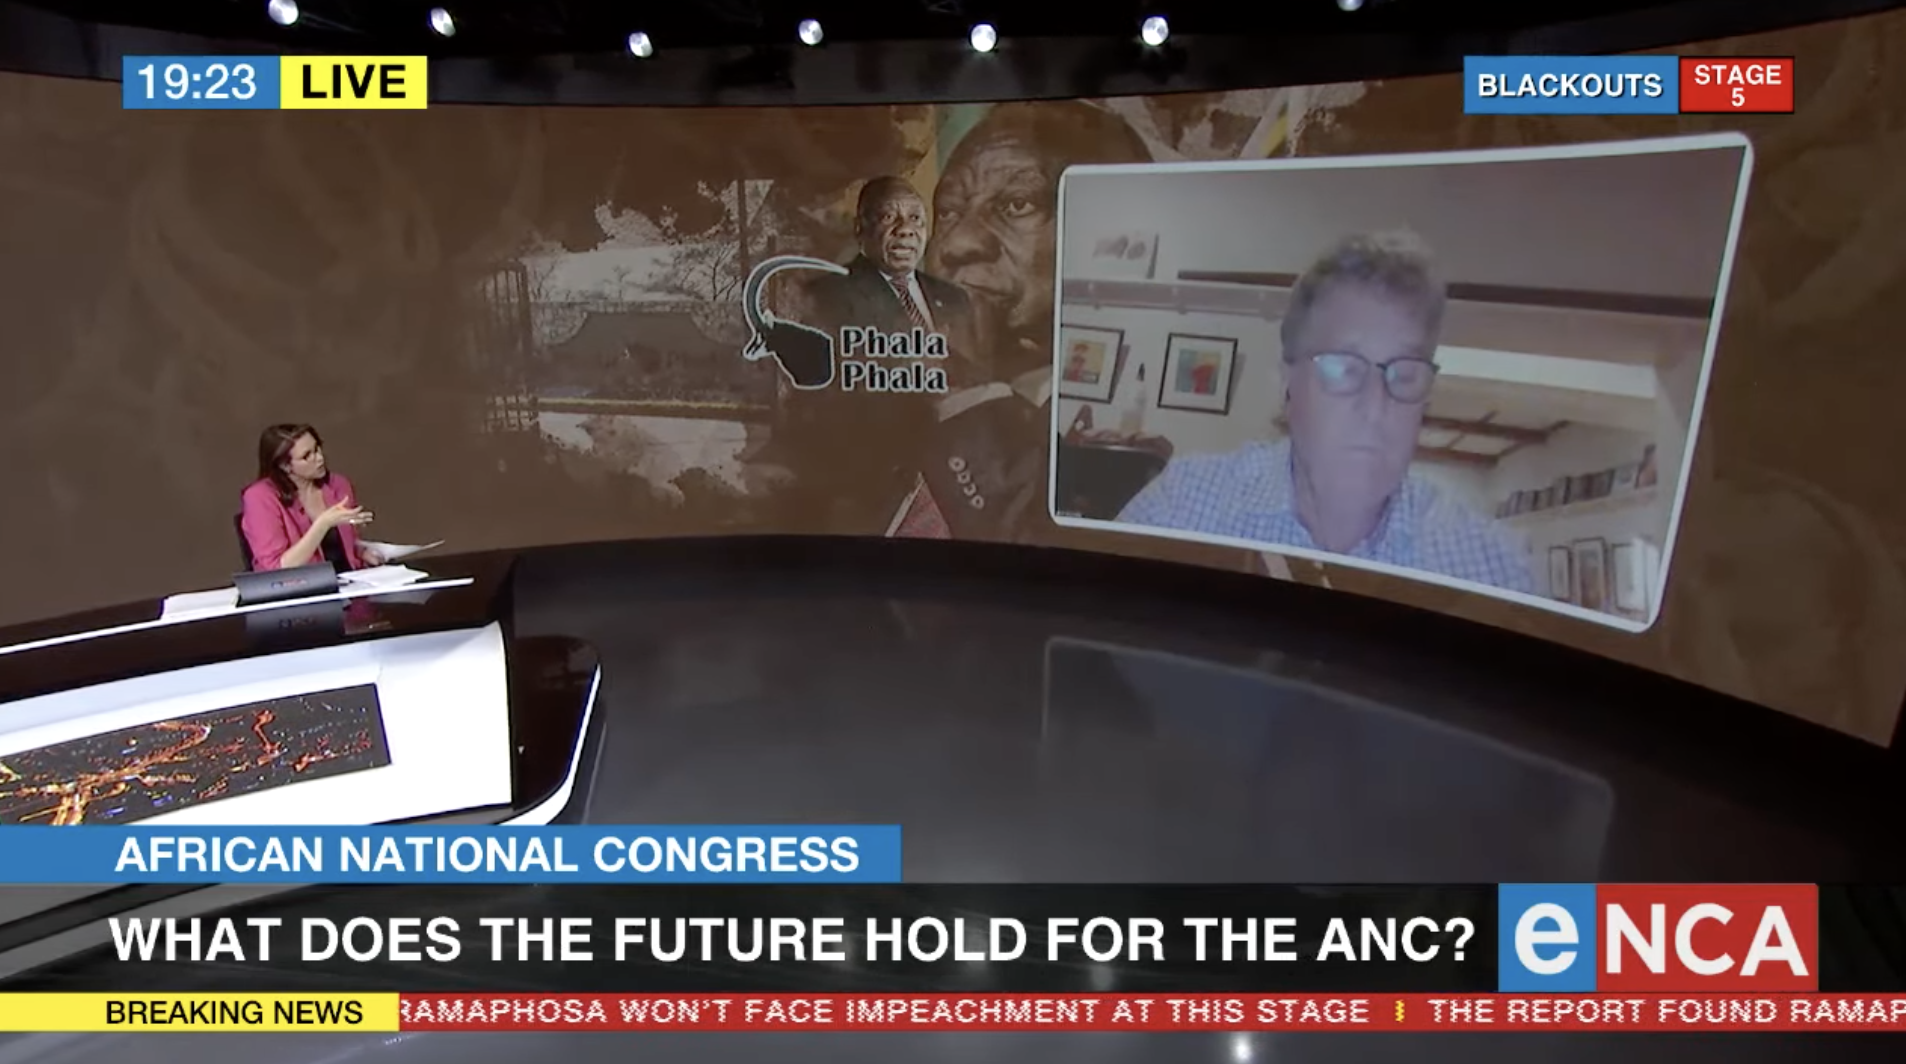 Discussion | What does the future hold for the ANC?